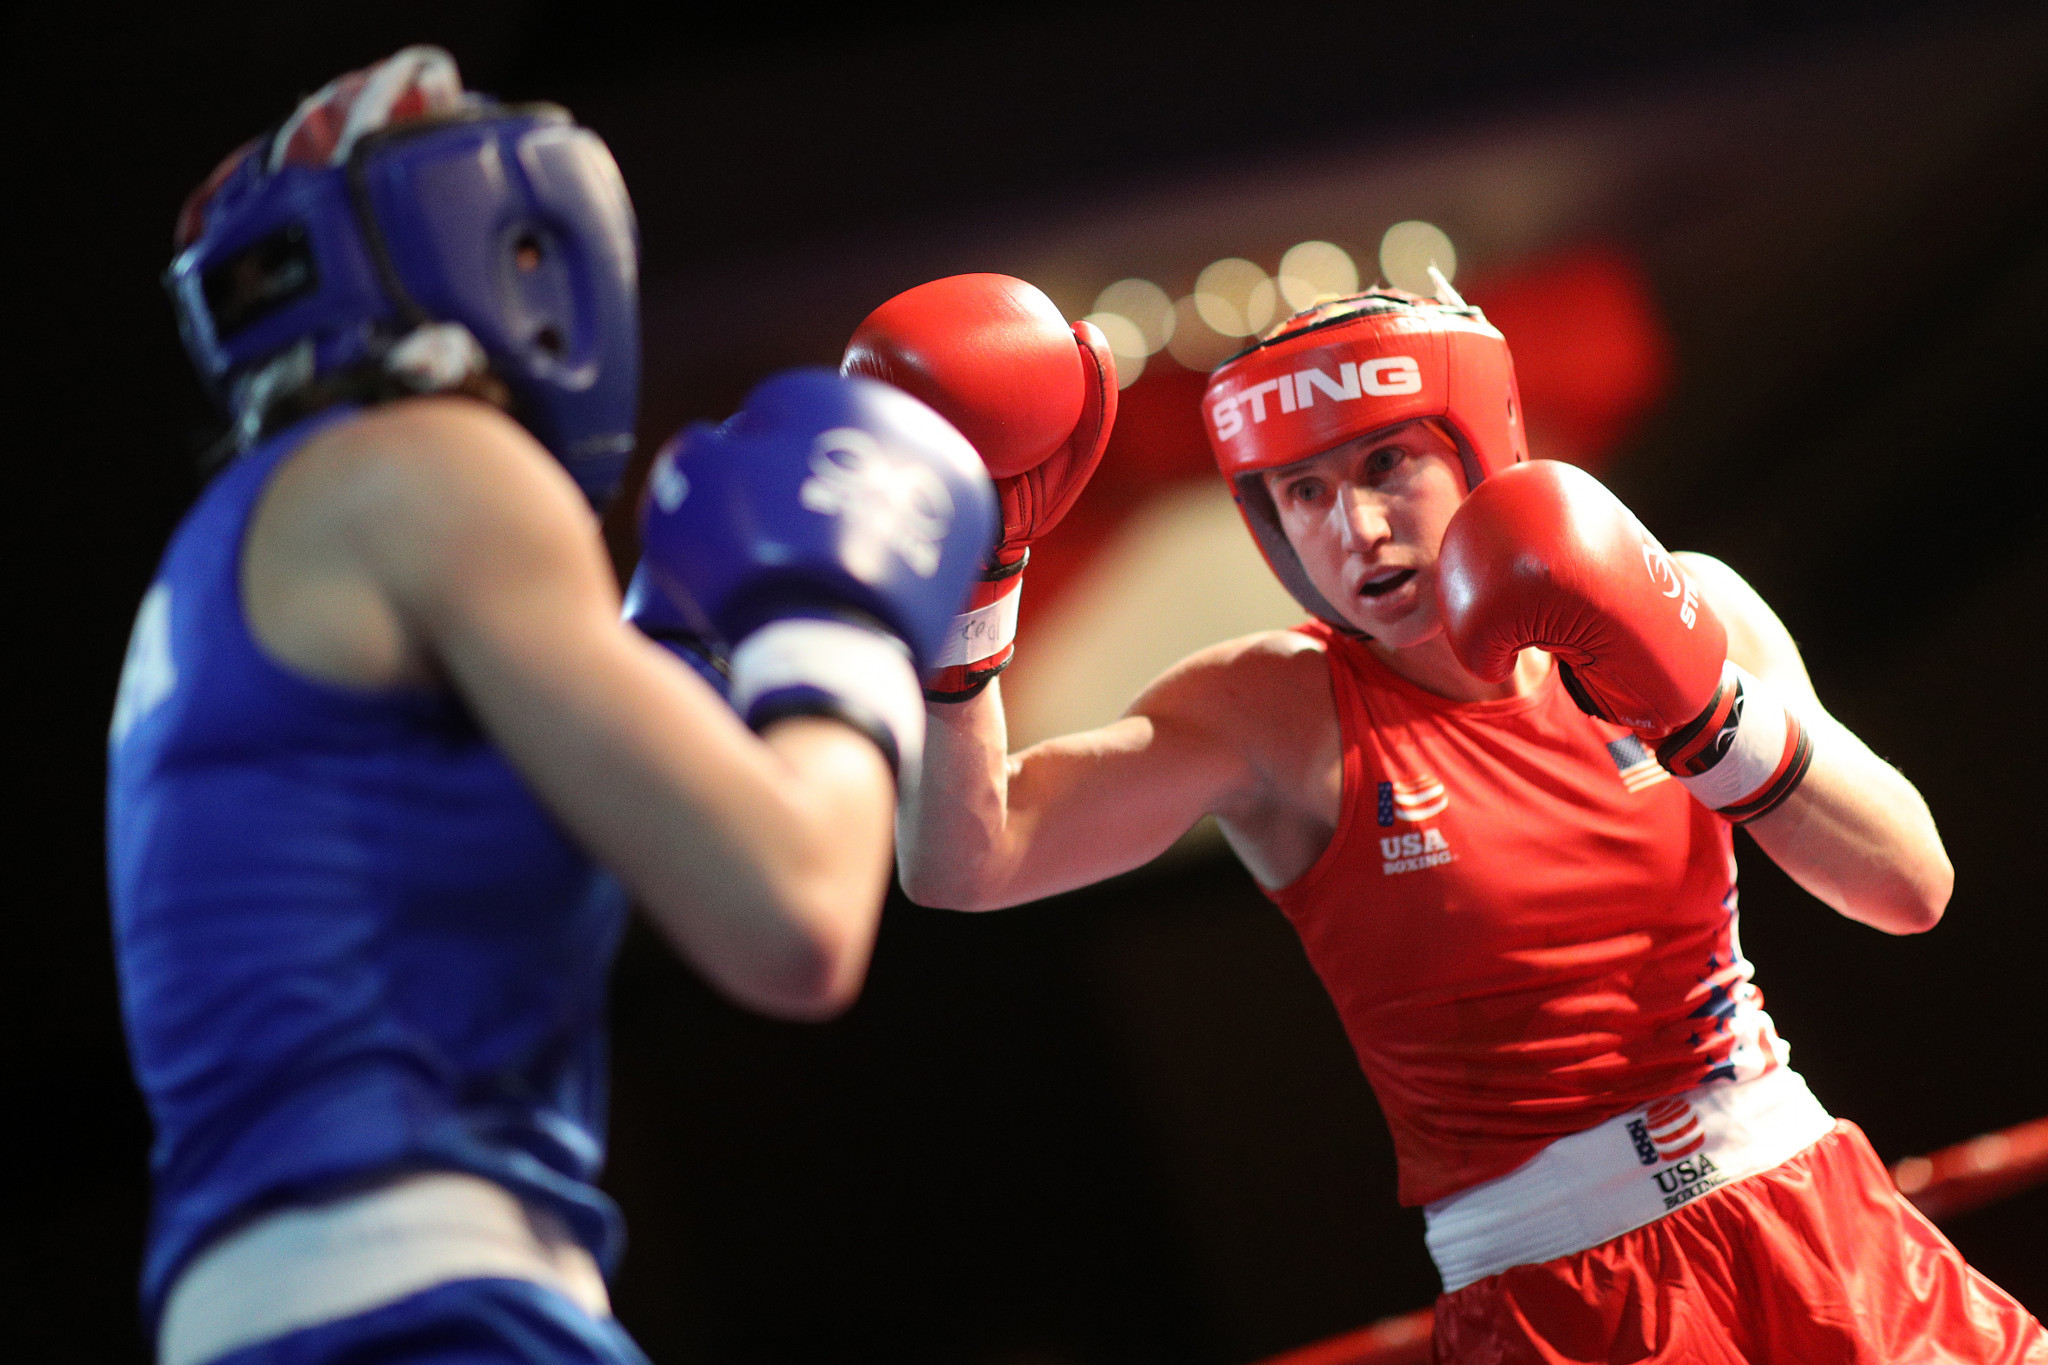 Virginia Fuchs is among the participants at the USA Boxing training camp ©USA Boxing